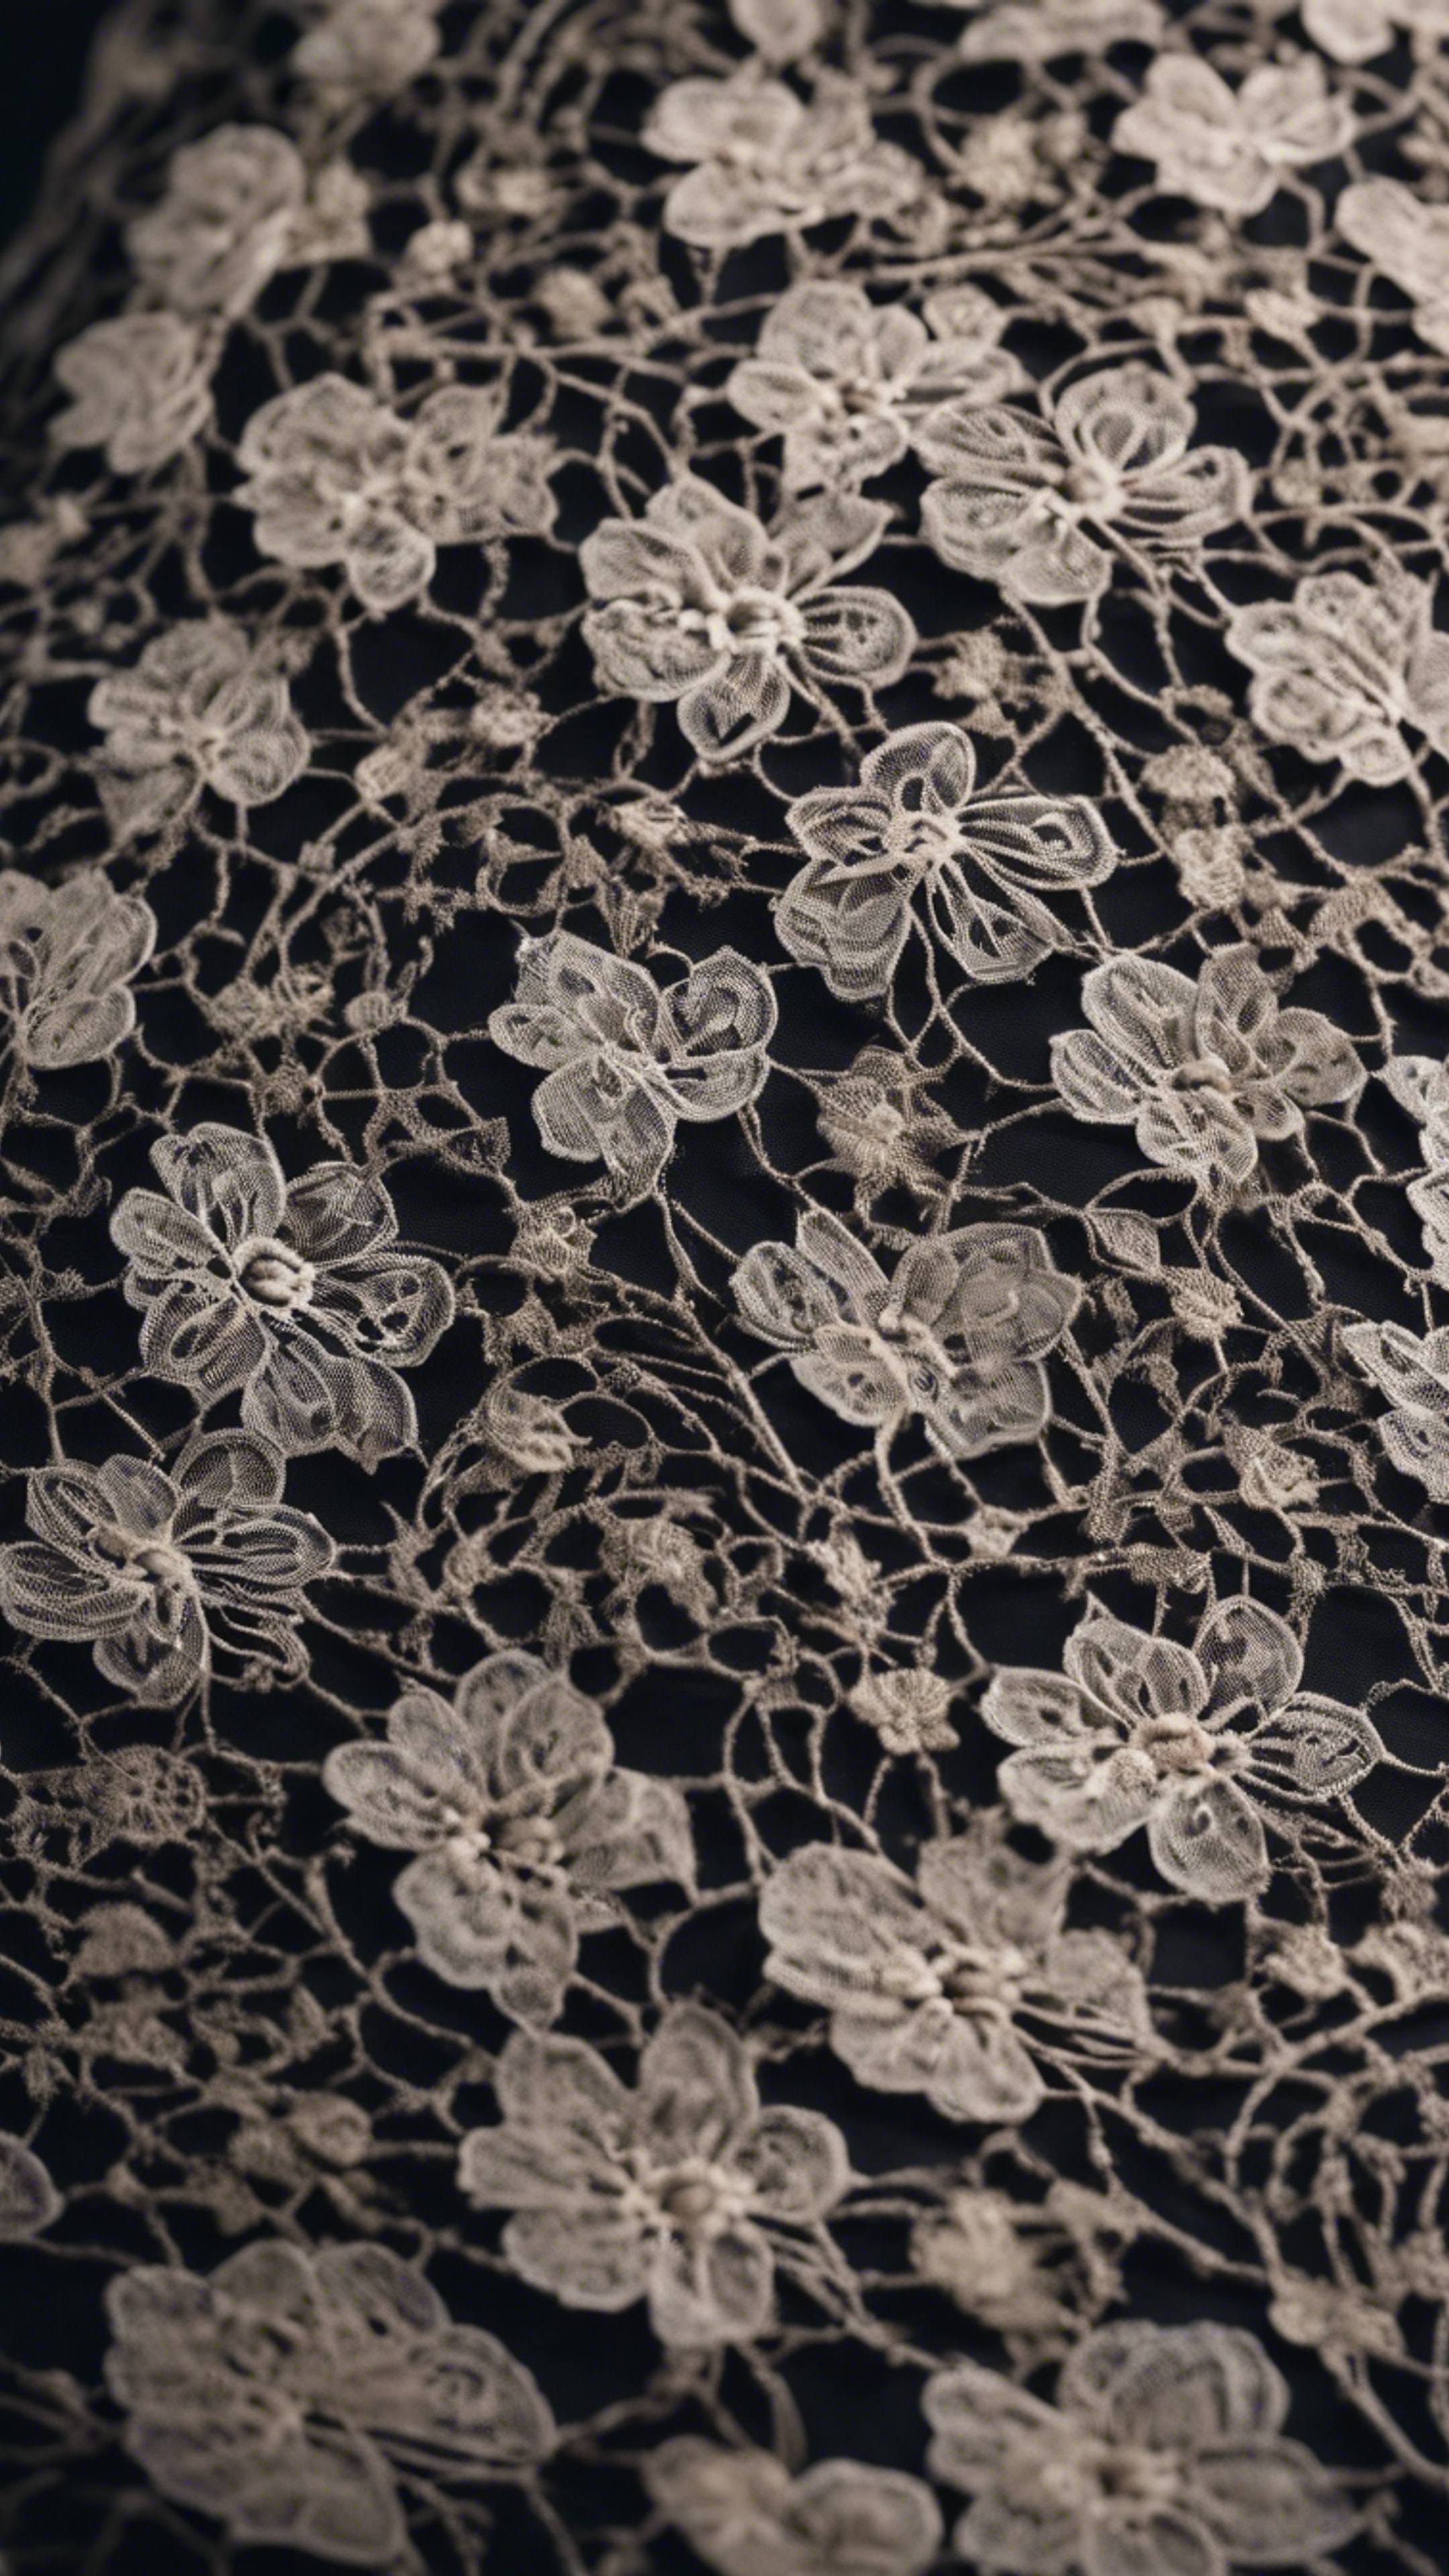 Close up of black lace with delicate floral pattern